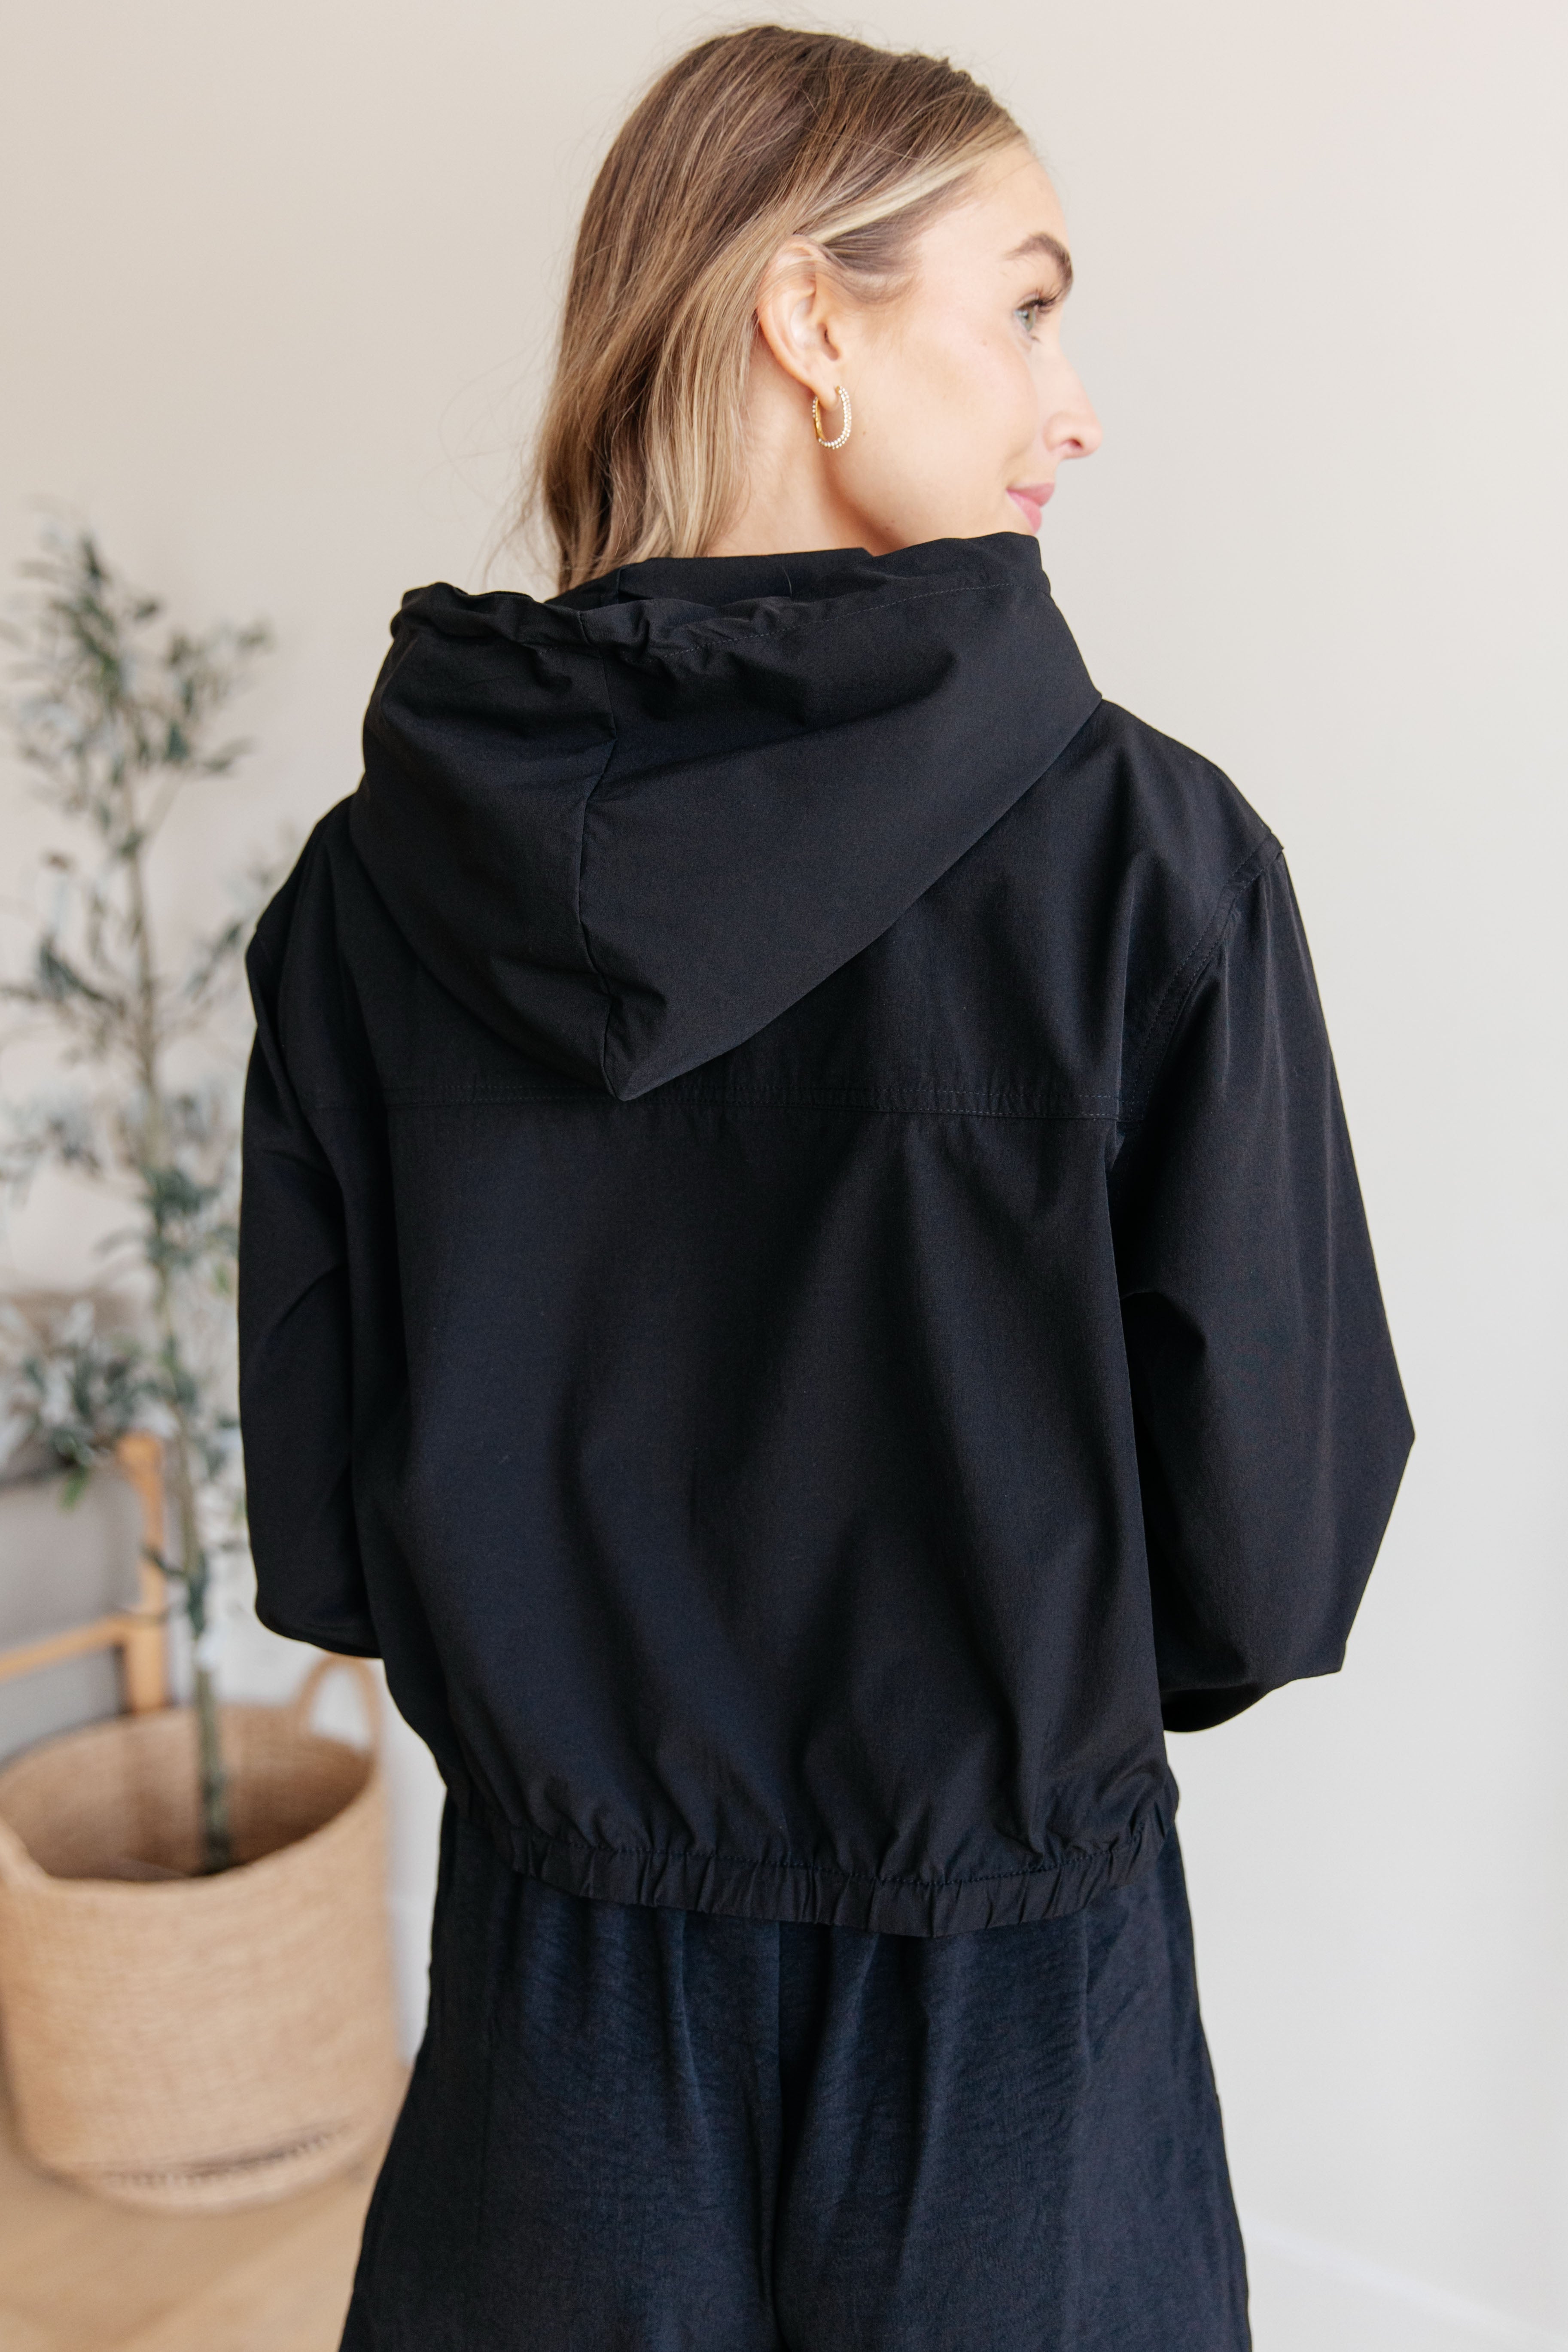 Sky of Only Clouds Zip Up • Black